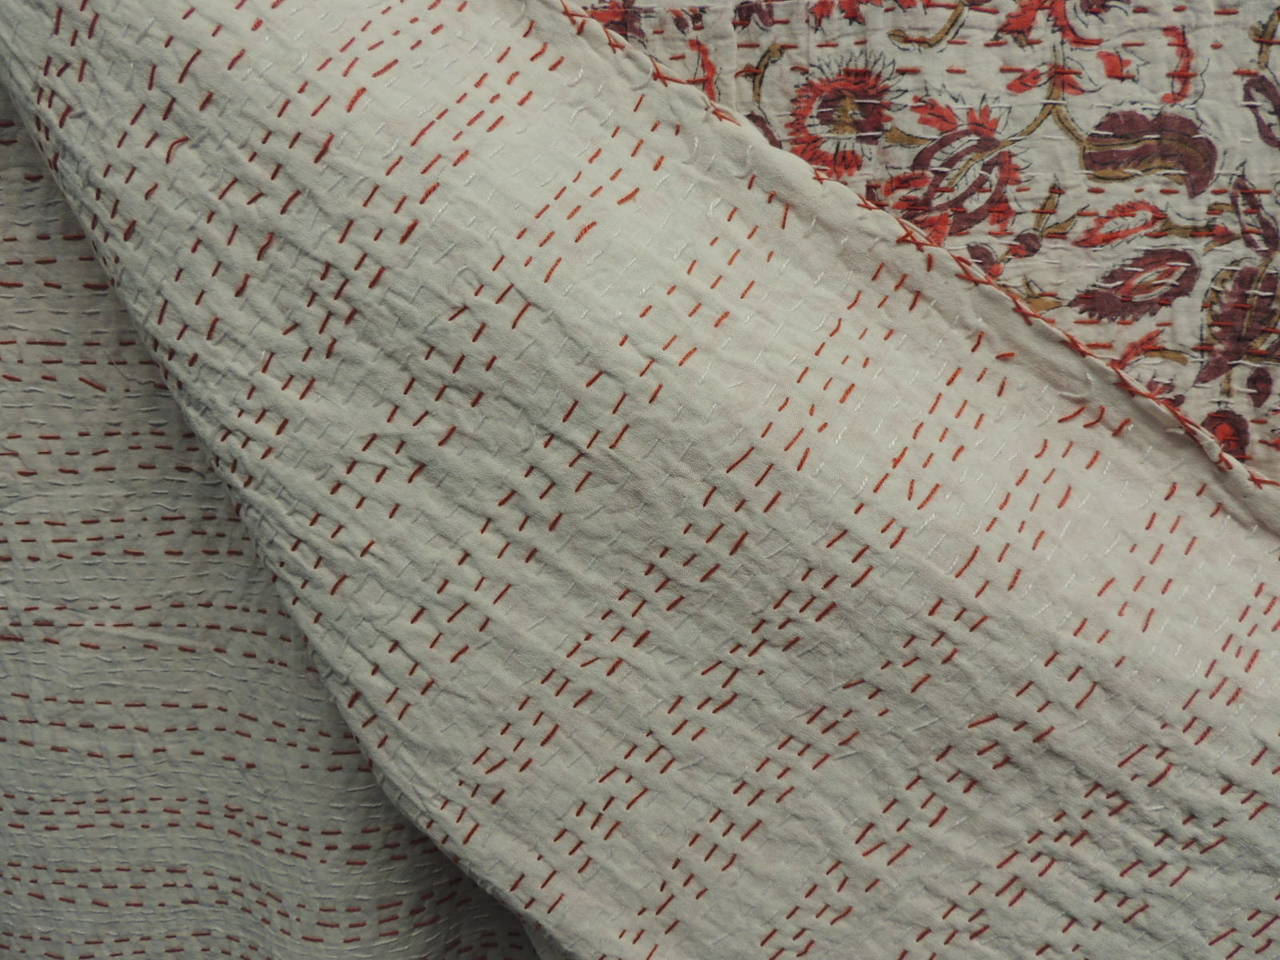 Pink and white floral hand-quilted blanket, patchwork design, individual pieces of hand-blocked textiles have been stitched together to create this large (king size) blanket/coverlet. Solid white backing with red stitching up-down and hand-stitched